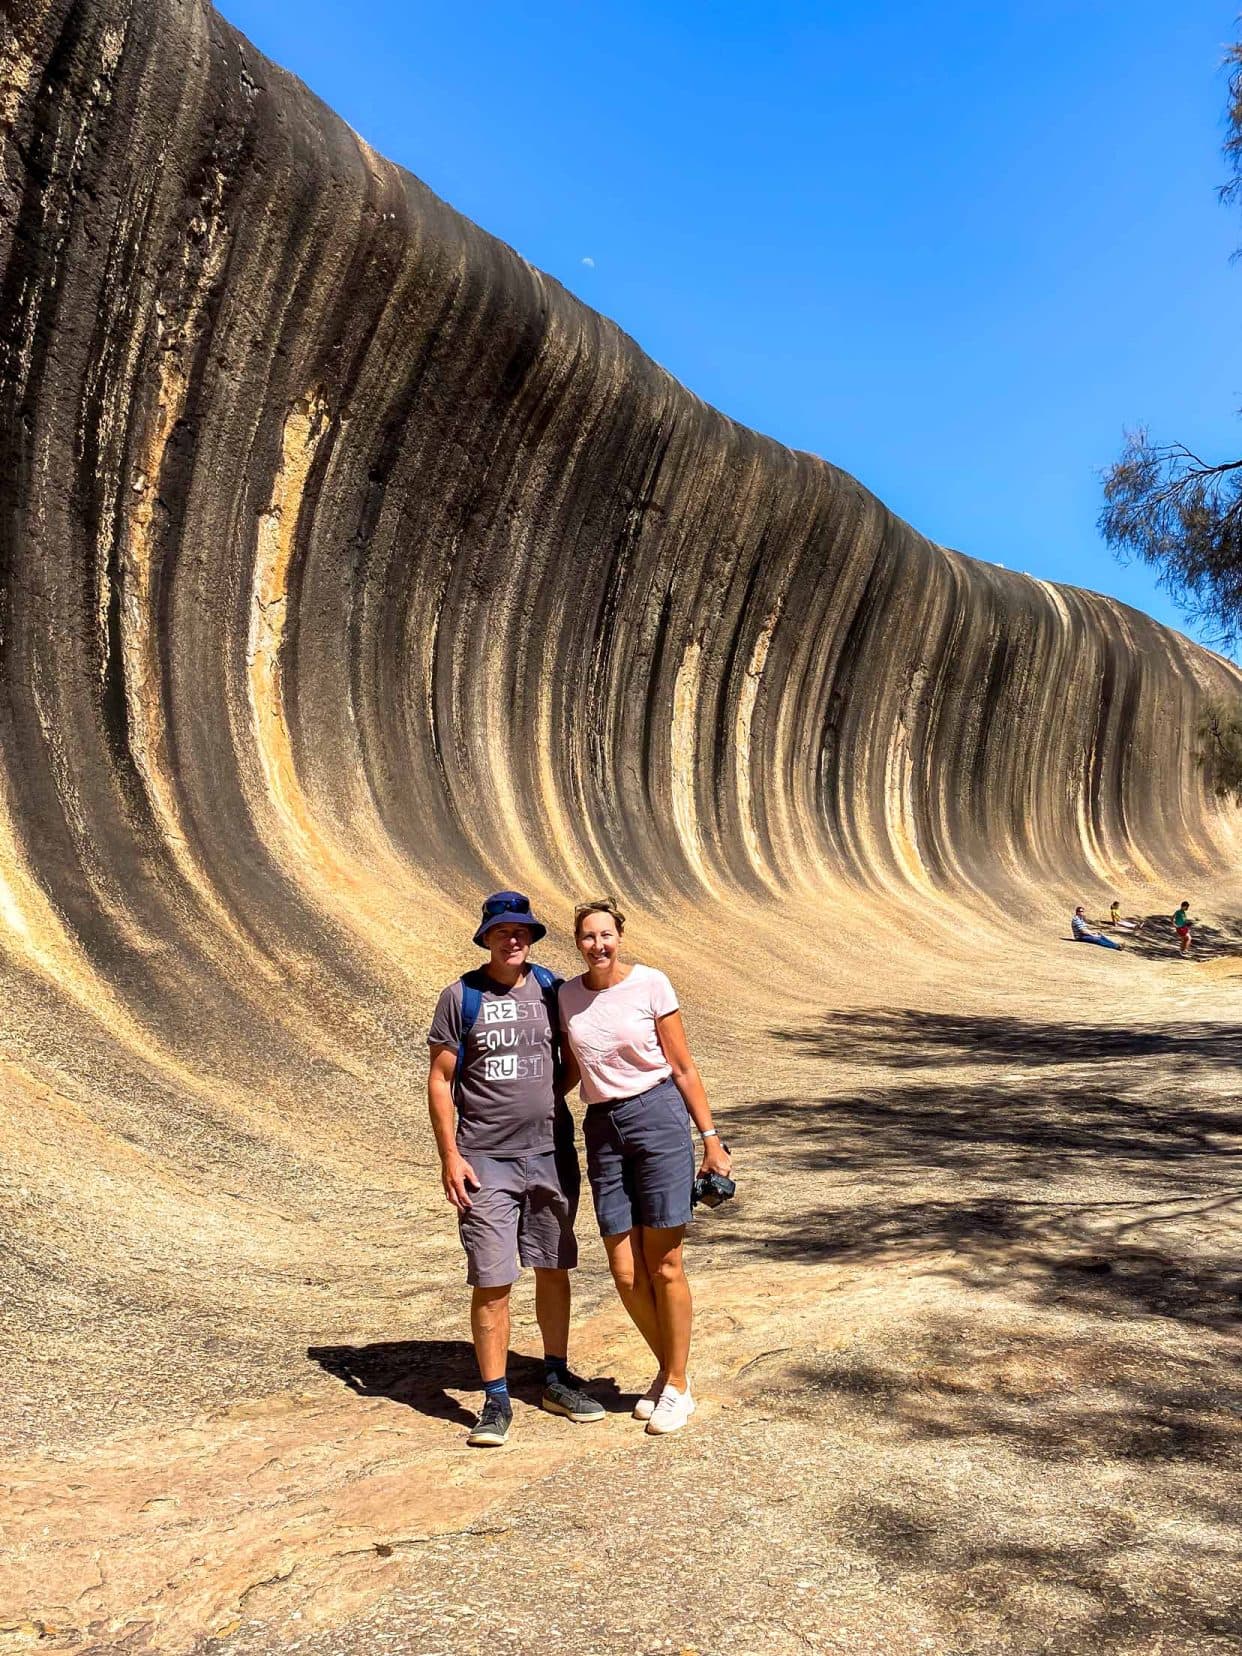 shelley and Lars at wave rock - a rock shaped like a wave